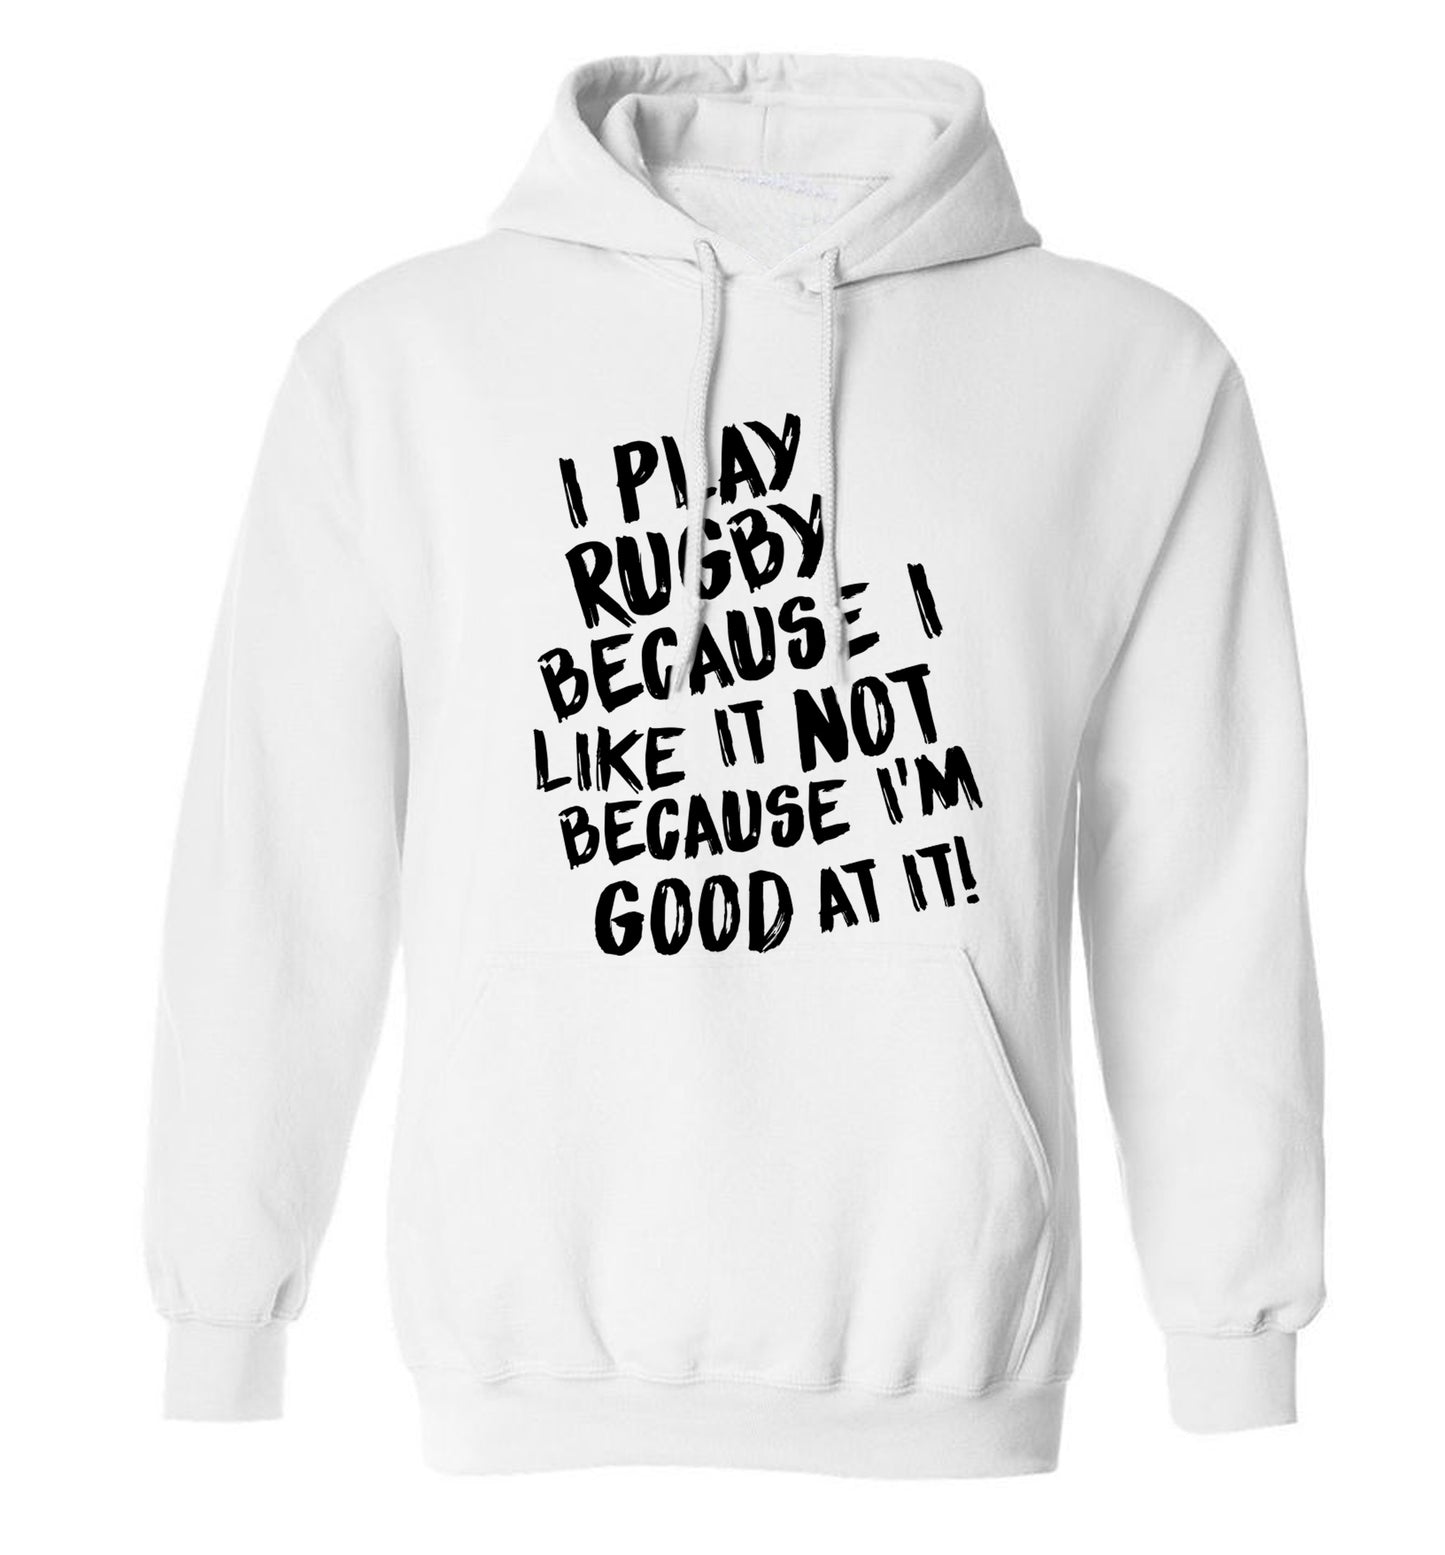 I play rugby because I like it not because I'm good at it adults unisex white hoodie 2XL